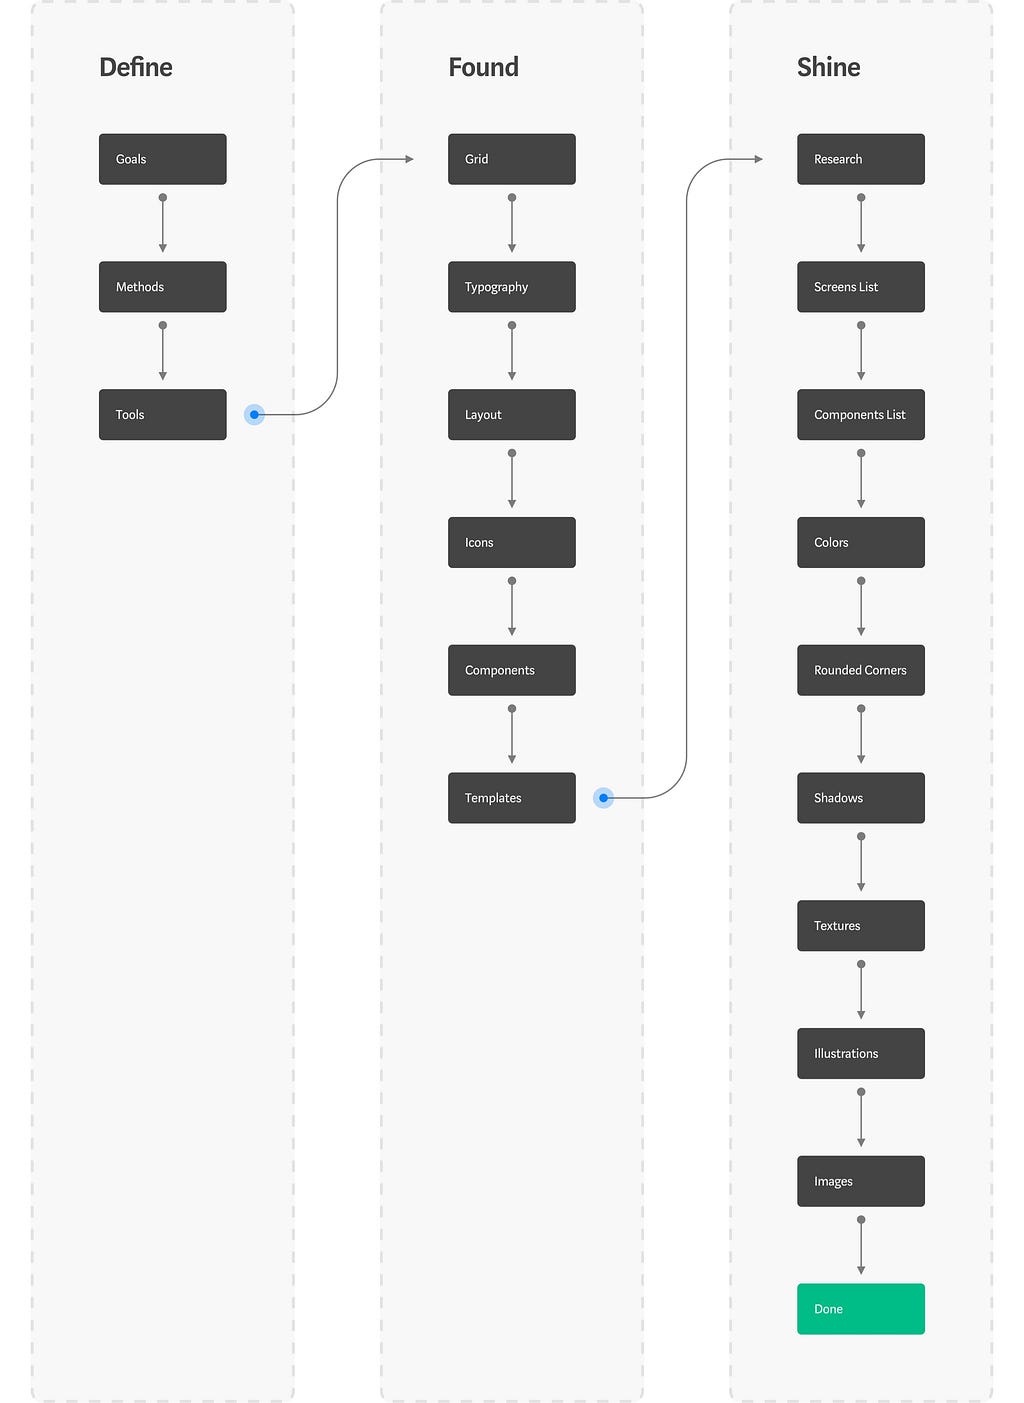 A linear flow scheme. 1 Define: Goals, Methods, Tools. 2 Found: Grid, Typography, Layout, Icons, Components, Templates. 3 Shine: Research, Screens List, Components List, Colors, Rounded Corners, Shadows, Textures, Illustrations, Images, Done.